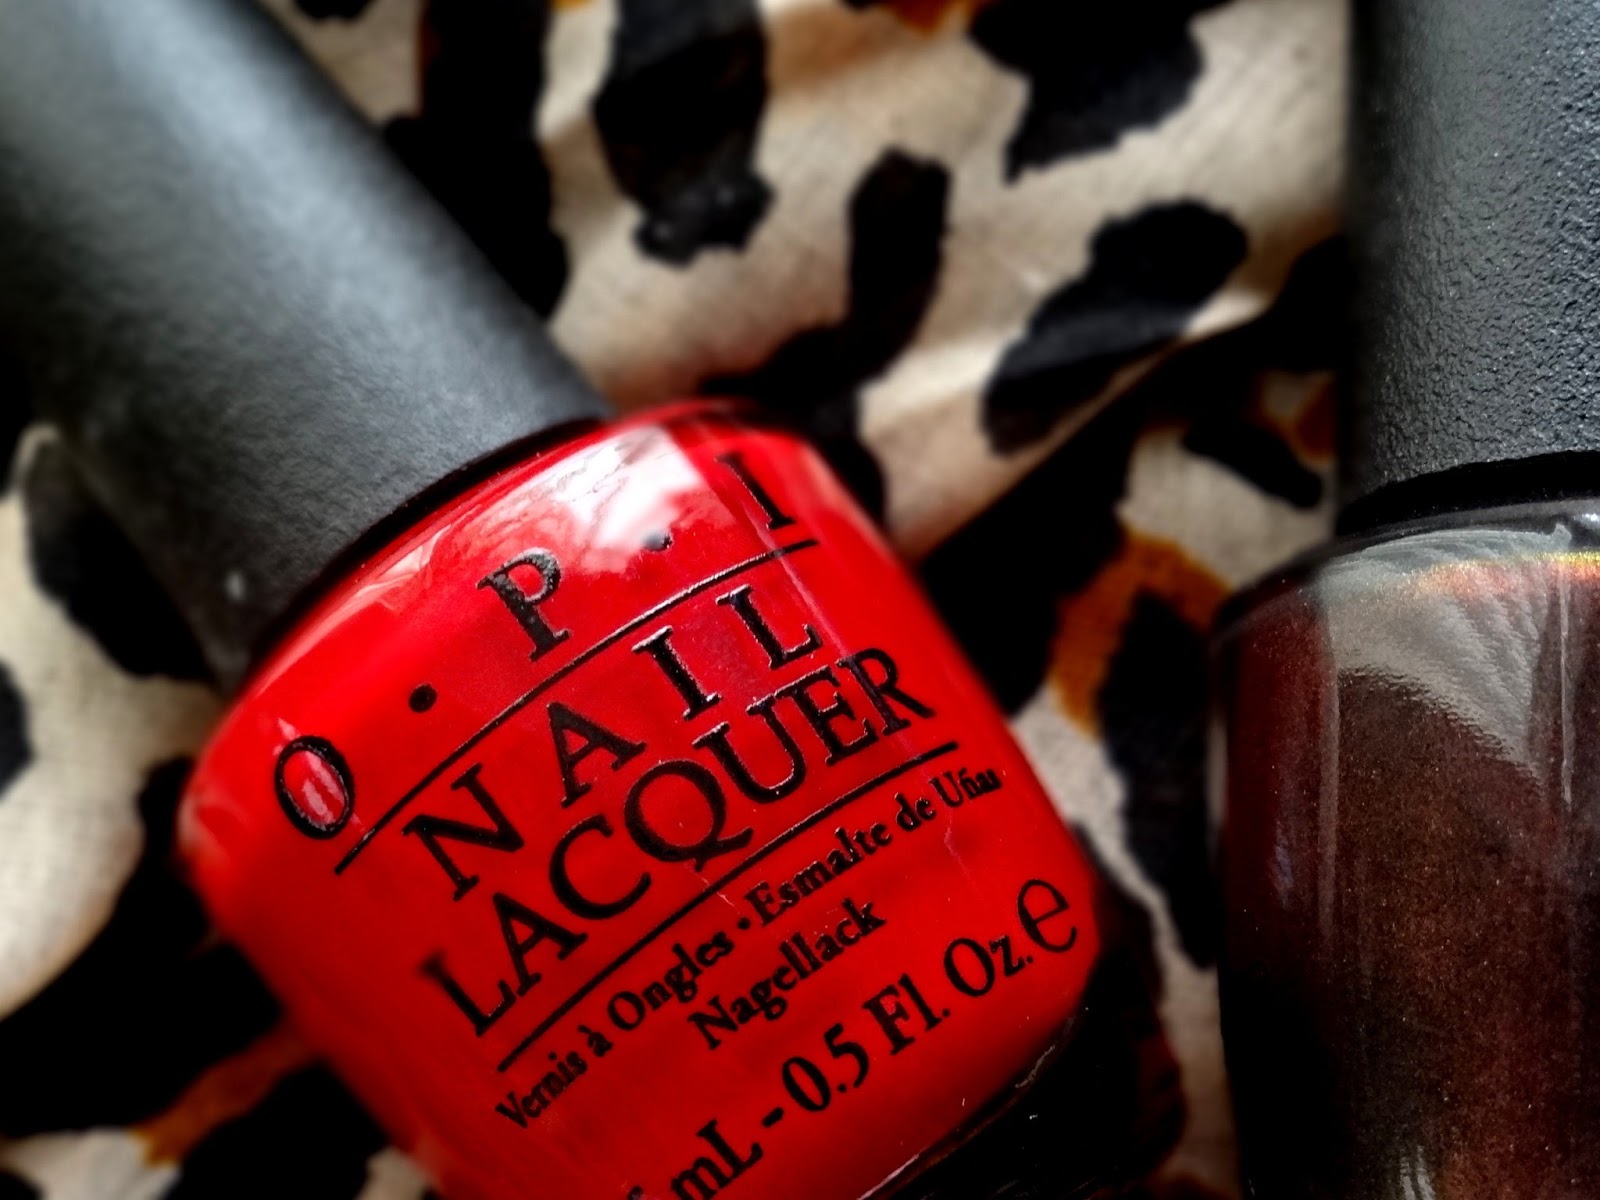 OPI Wrapped Wild For The Holidays - Muir Muir On The Wall, Big Apple Red | OPI Holiday 2014 Limited Edition